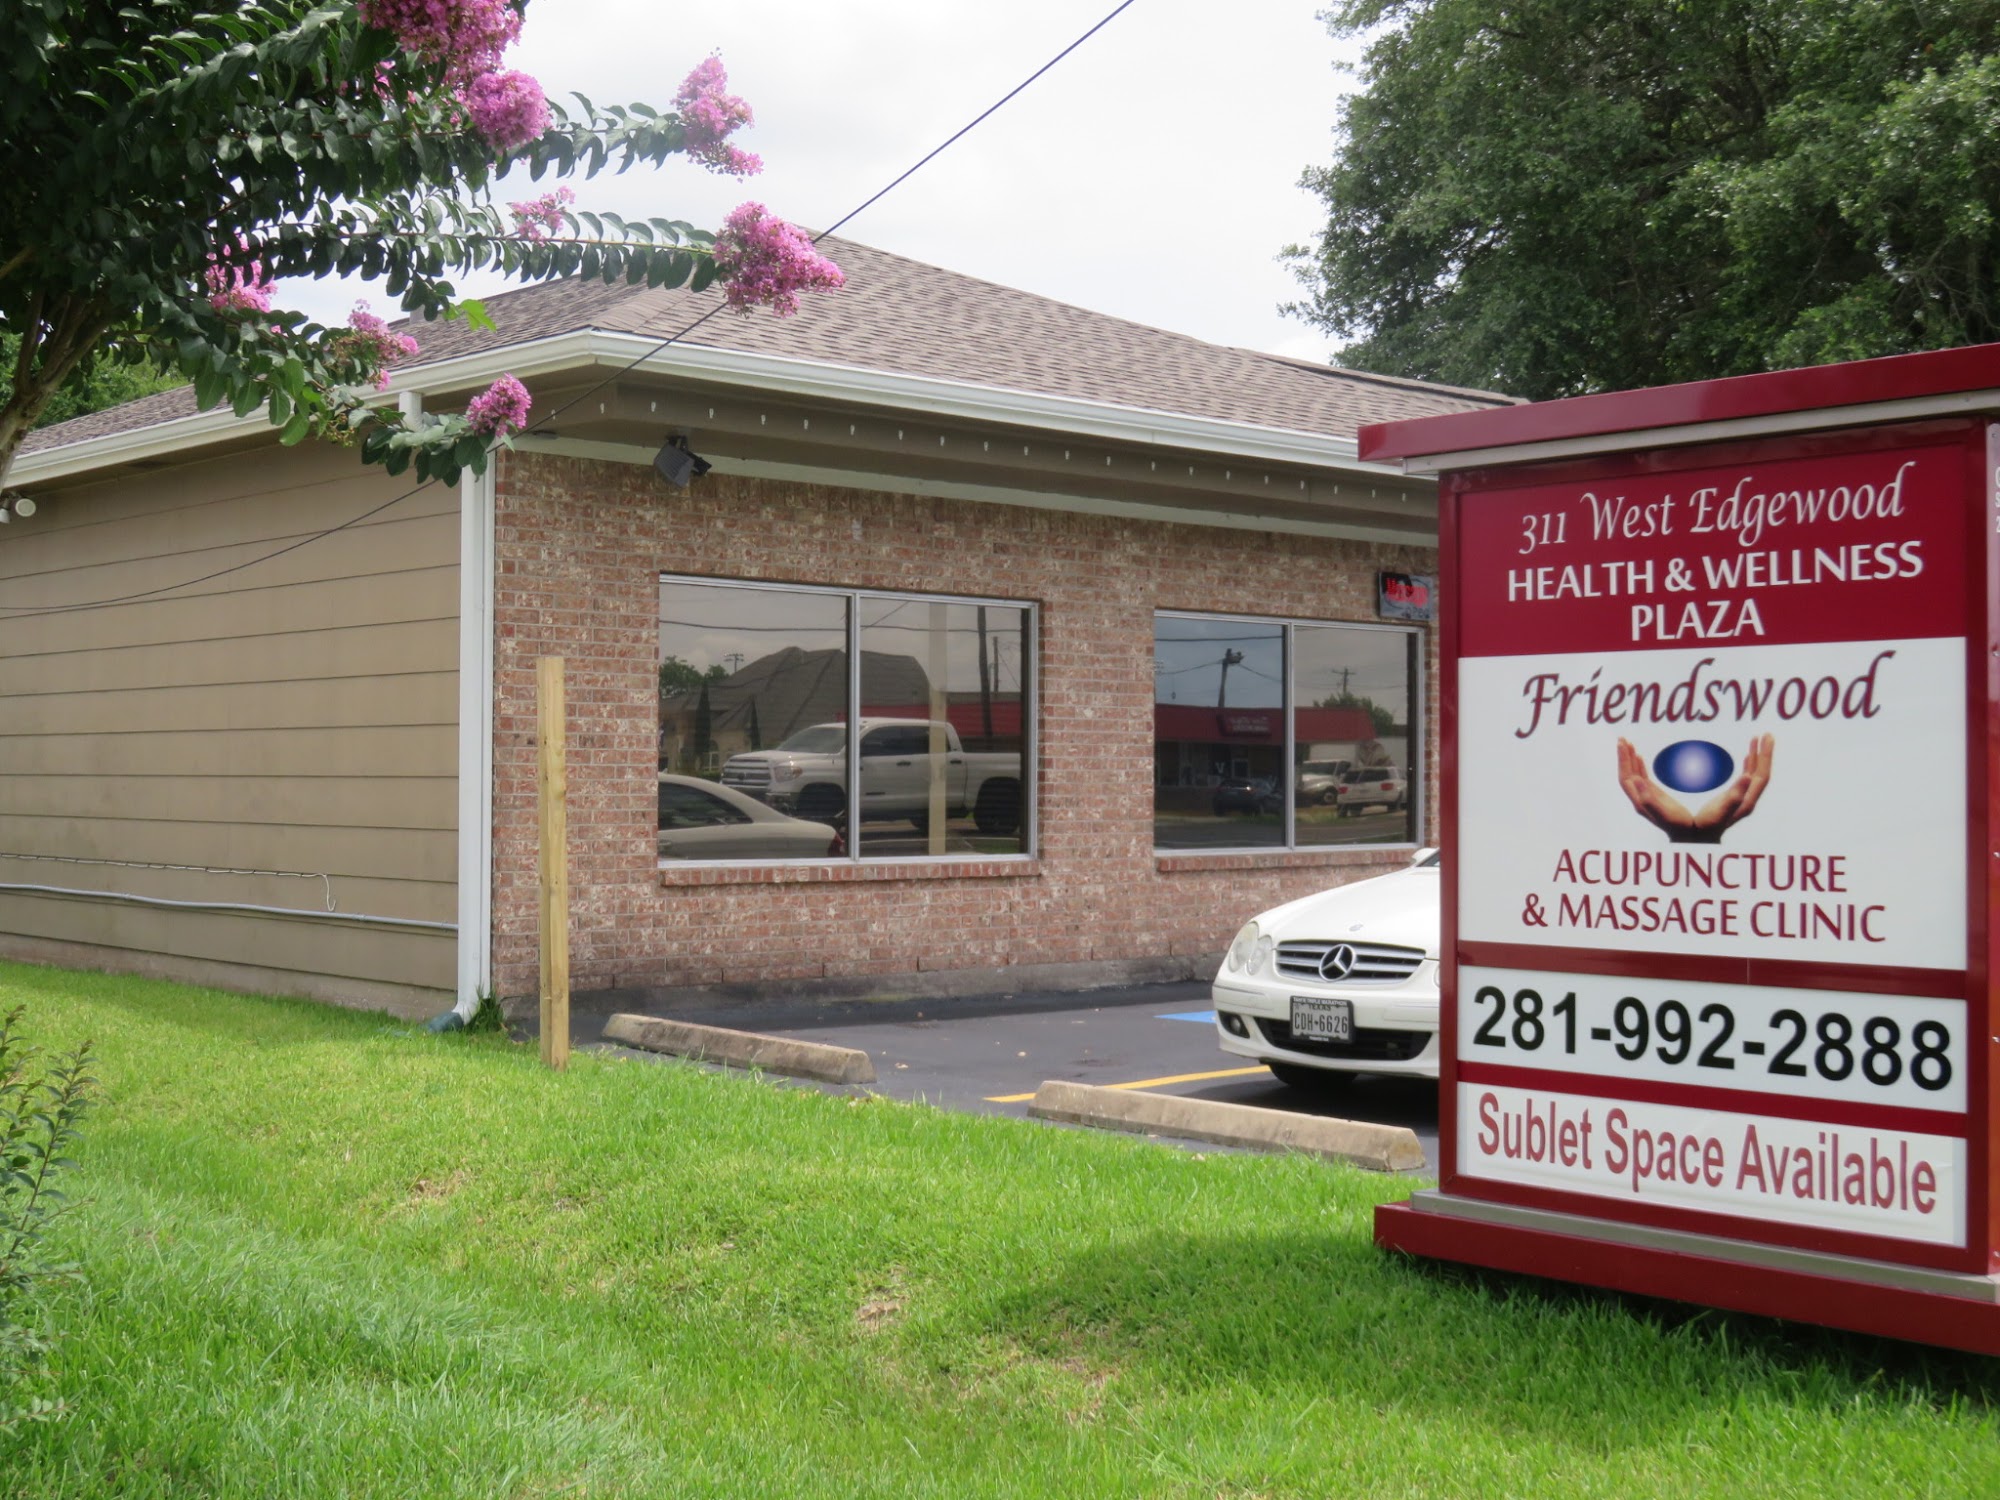 Friendswood Massage & Acupuncture Clinic